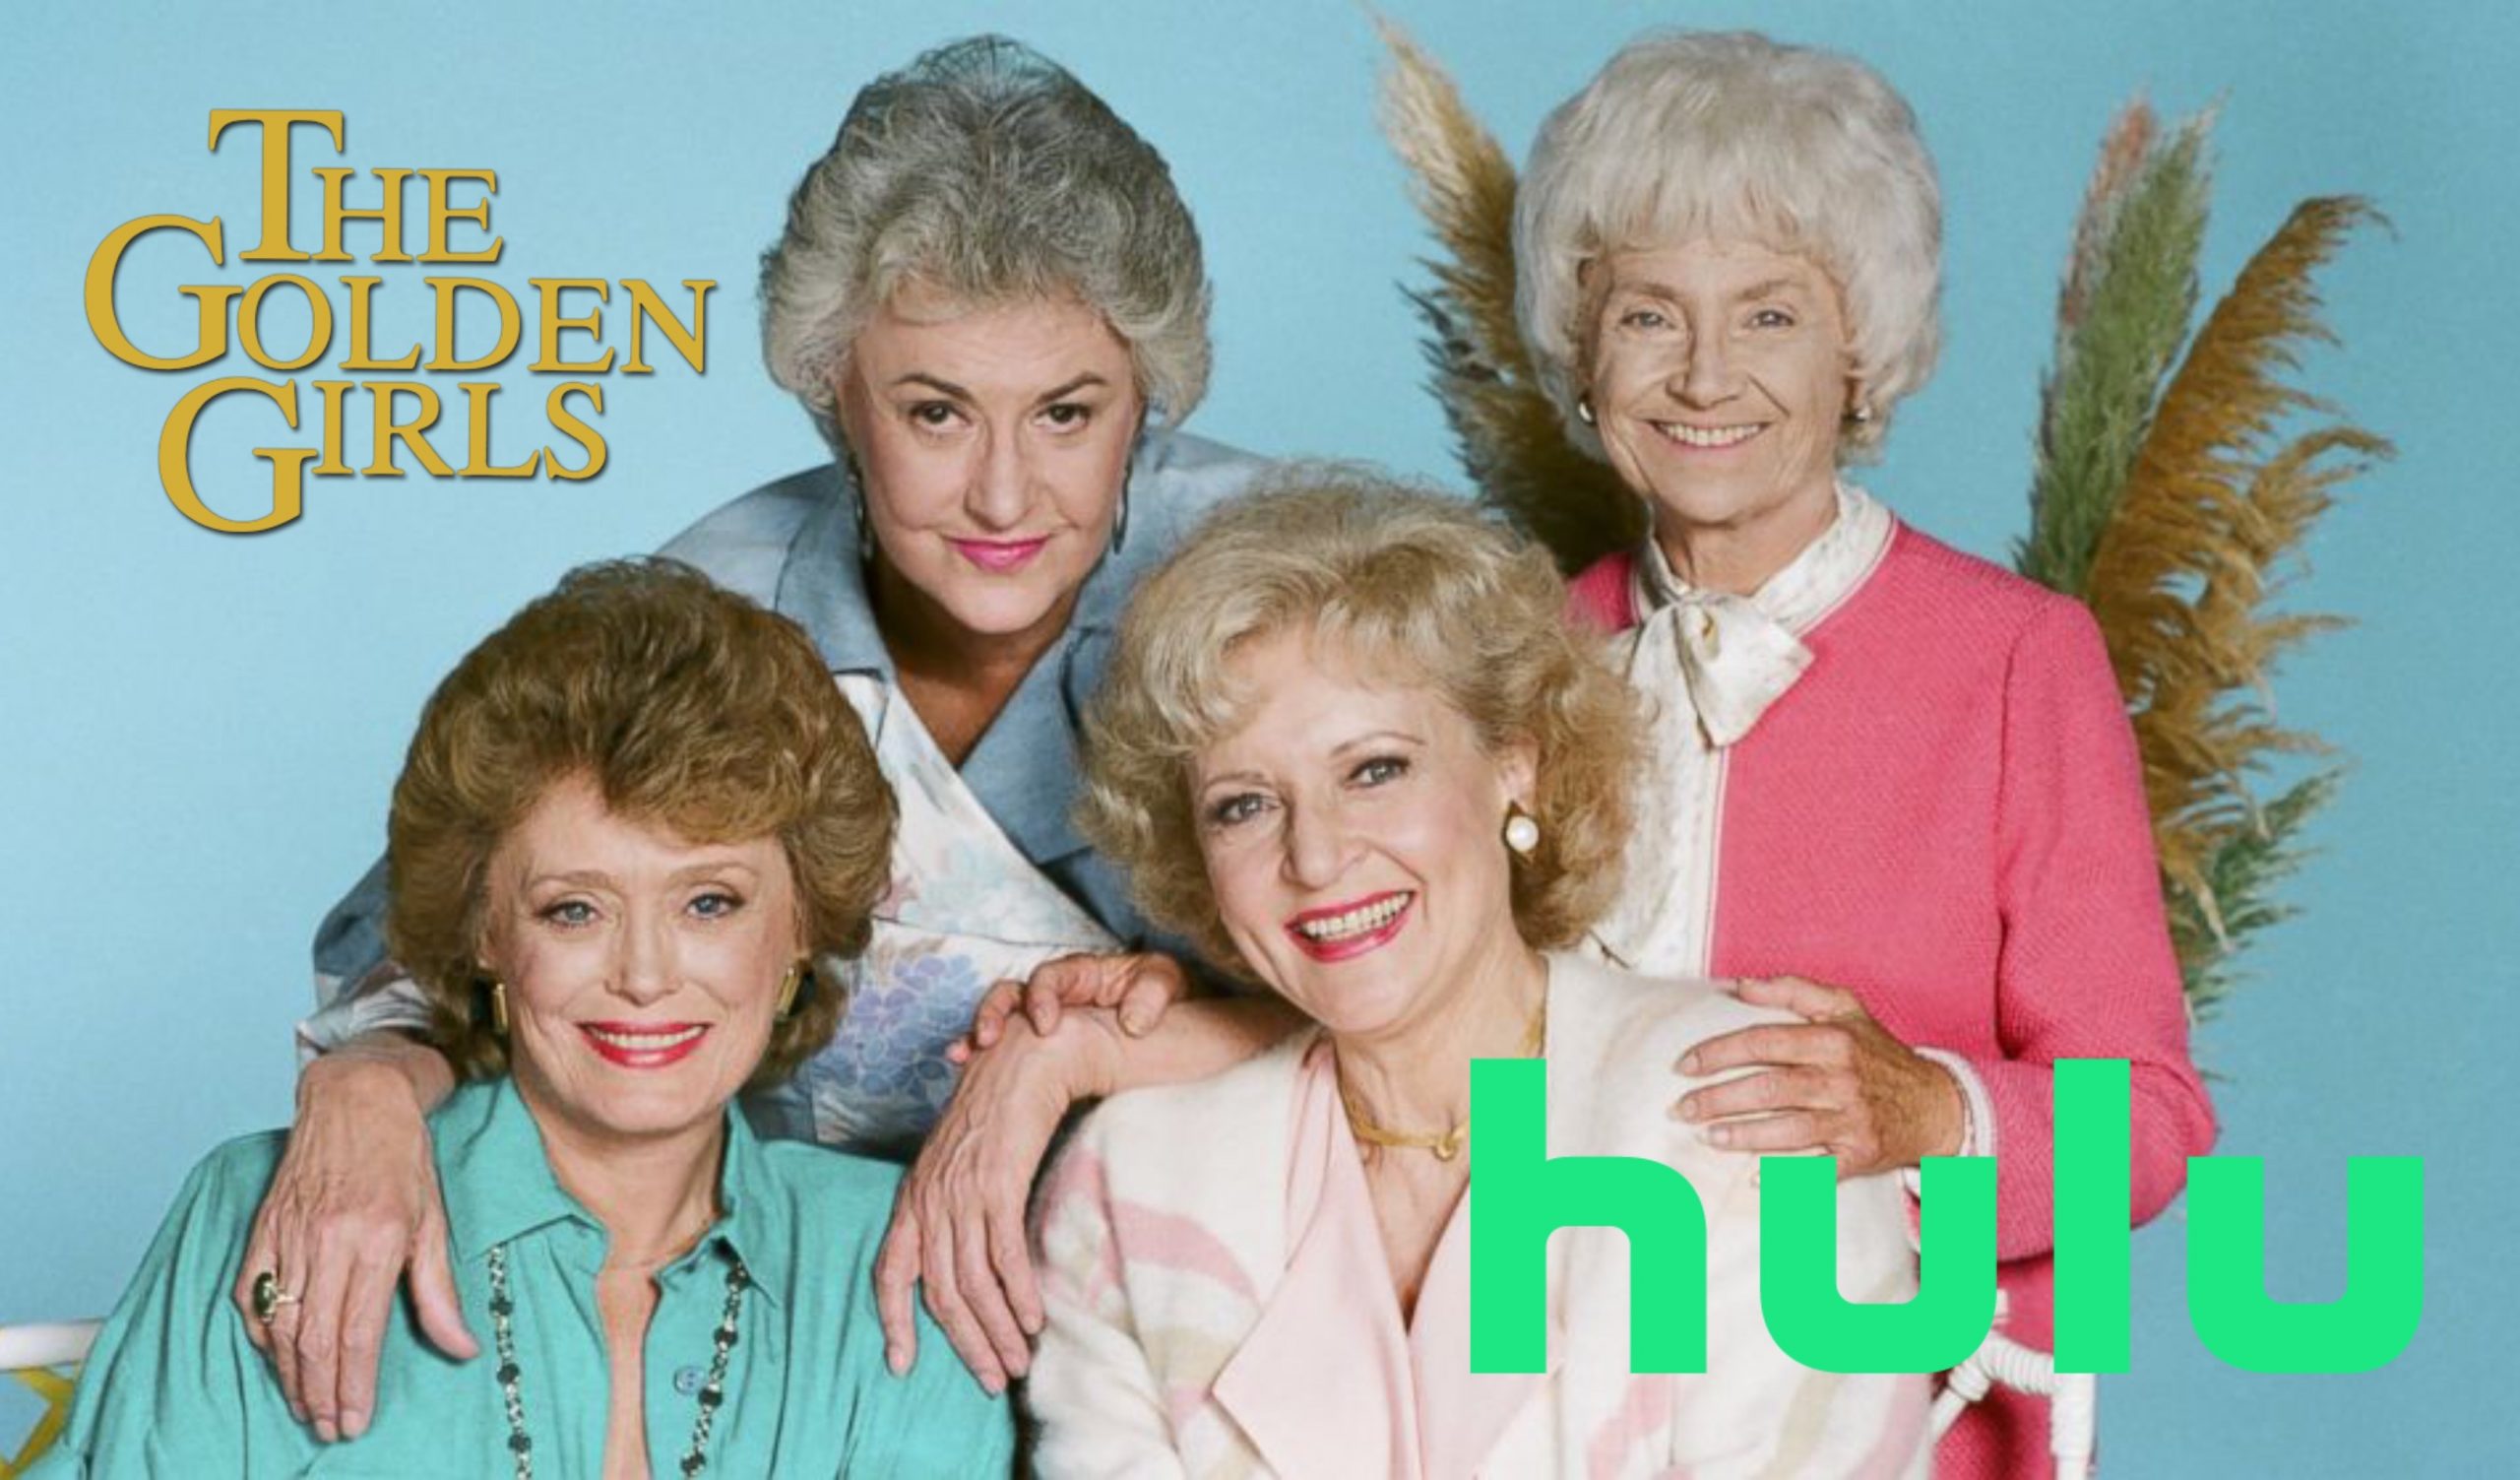 Disney Has Episode of ‘Golden Girls’ Removed from Hulu for Featuring Blackface